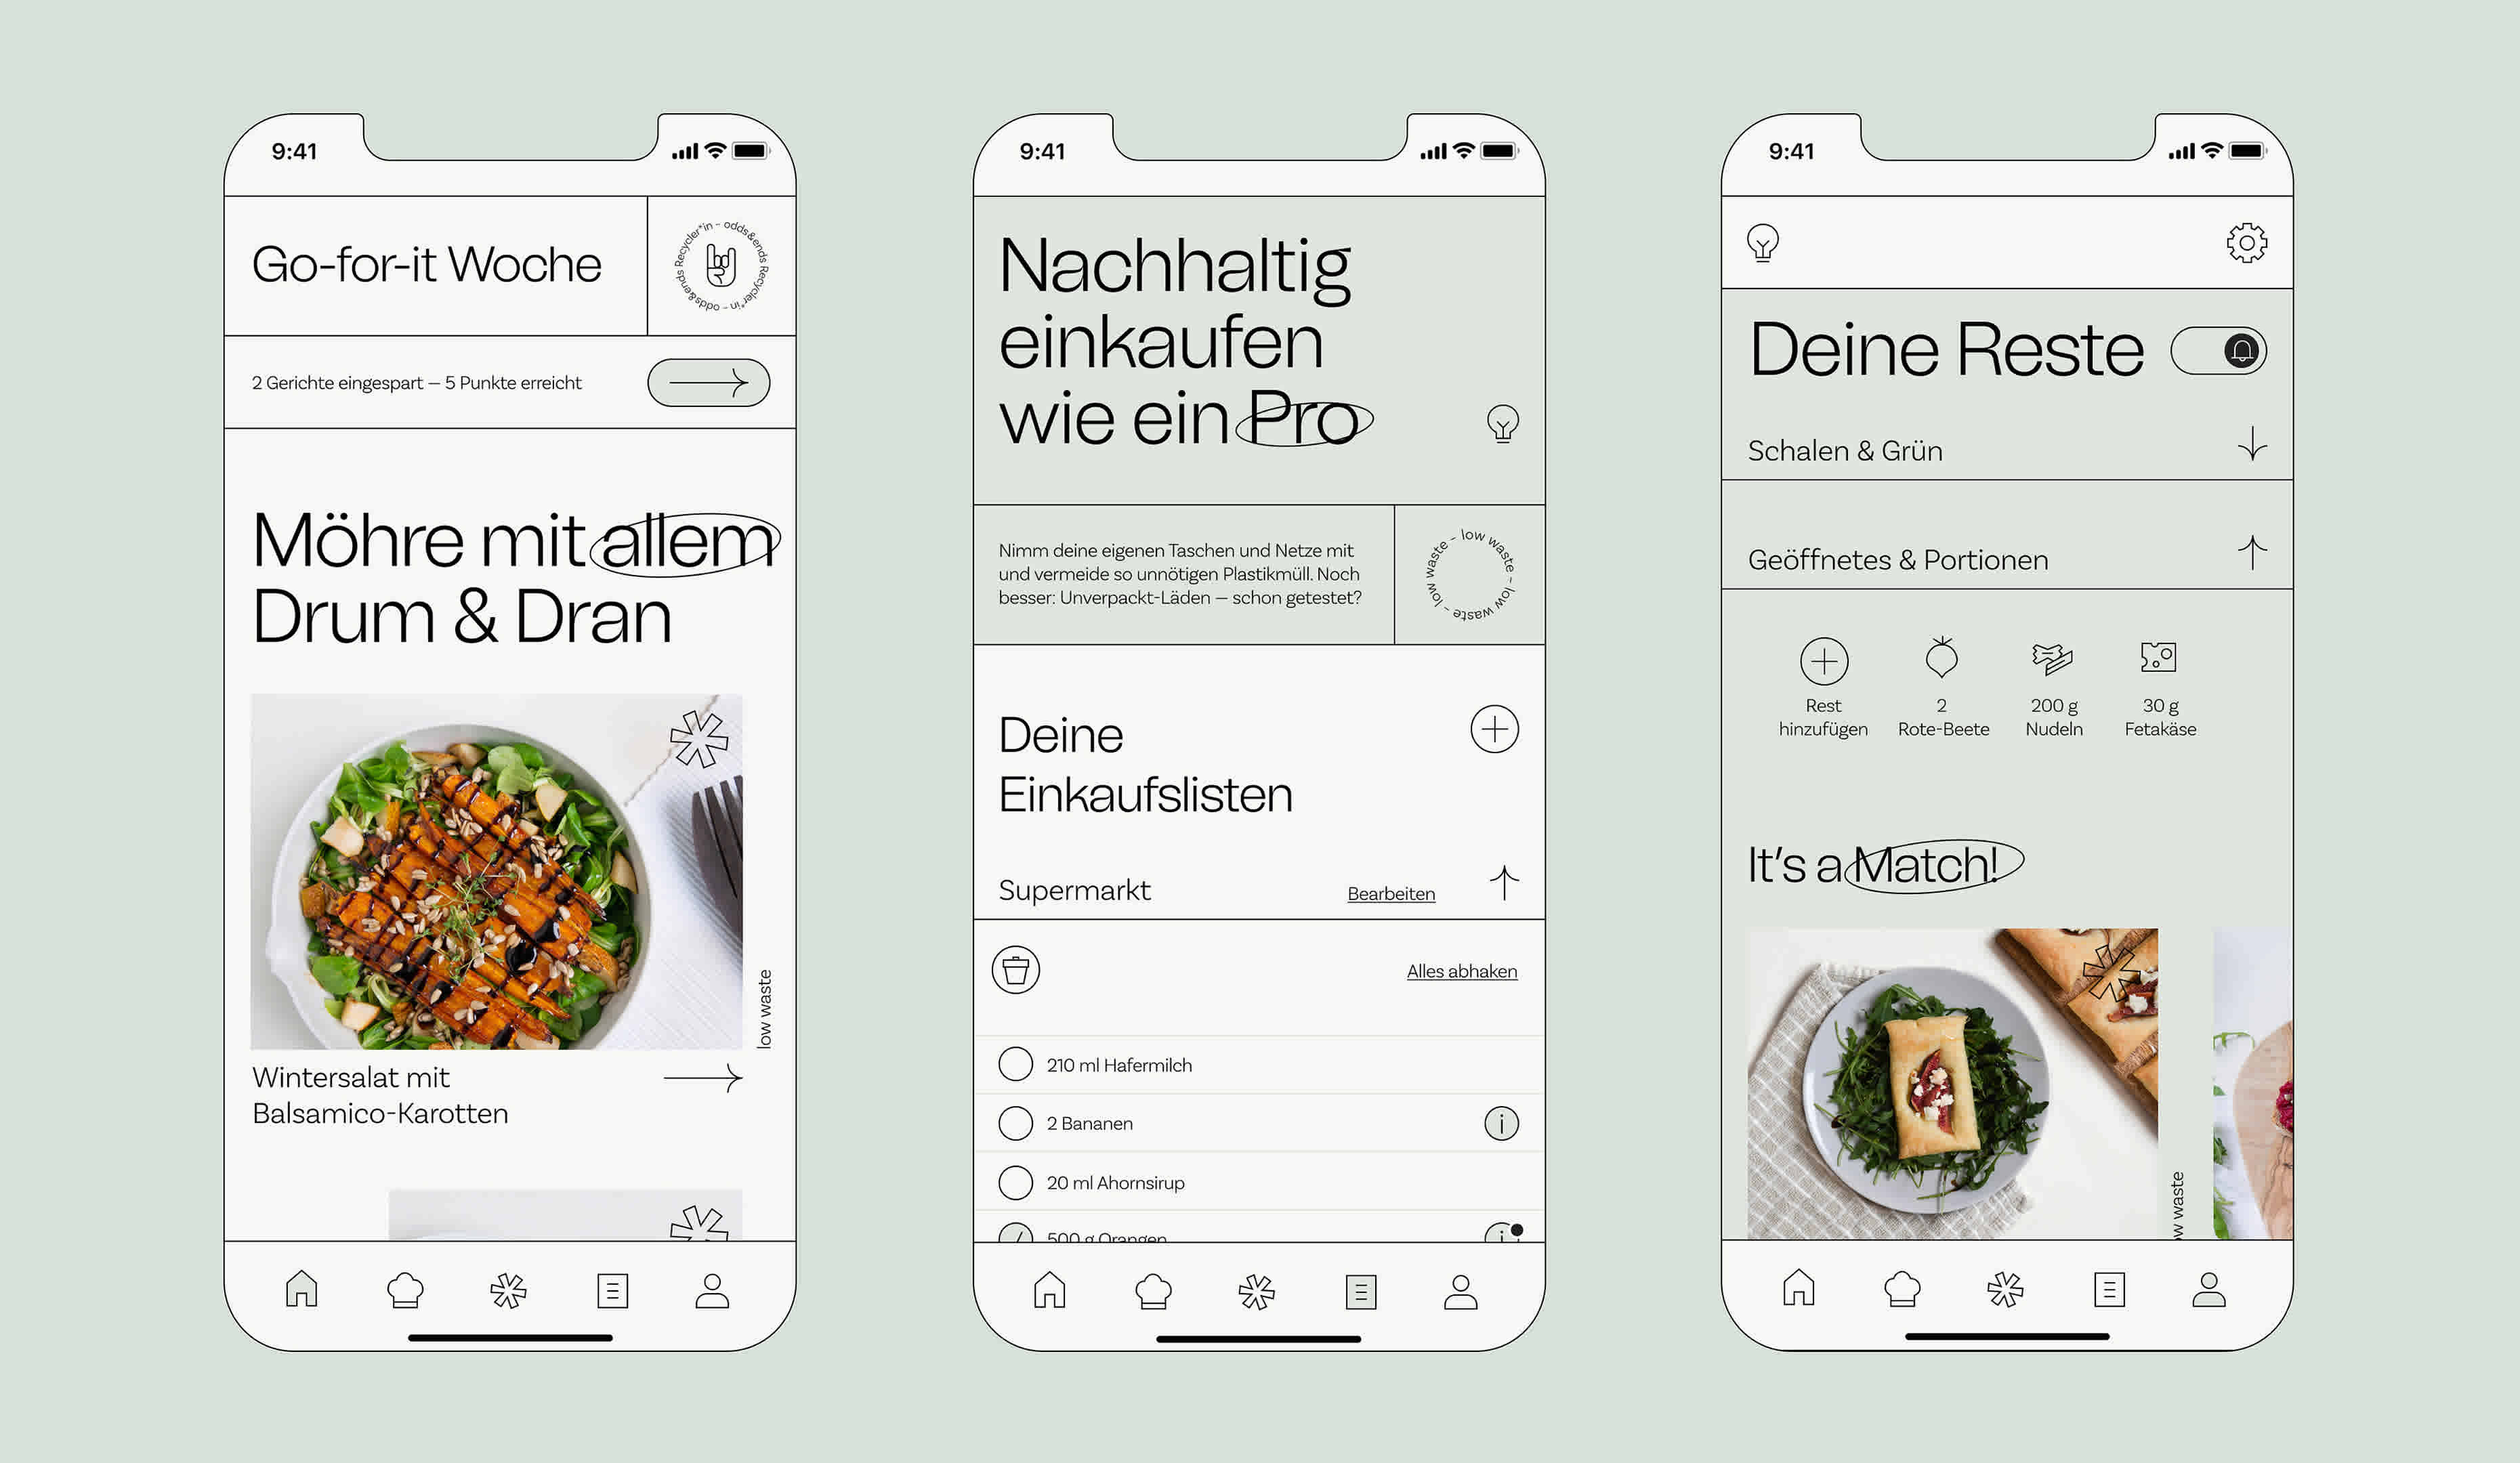 Three different screens of the odds & ends app can be seen side by side. They show recipes, the shopping list and the stock of leftovers. The design is light and fresh, yet structured and stable.